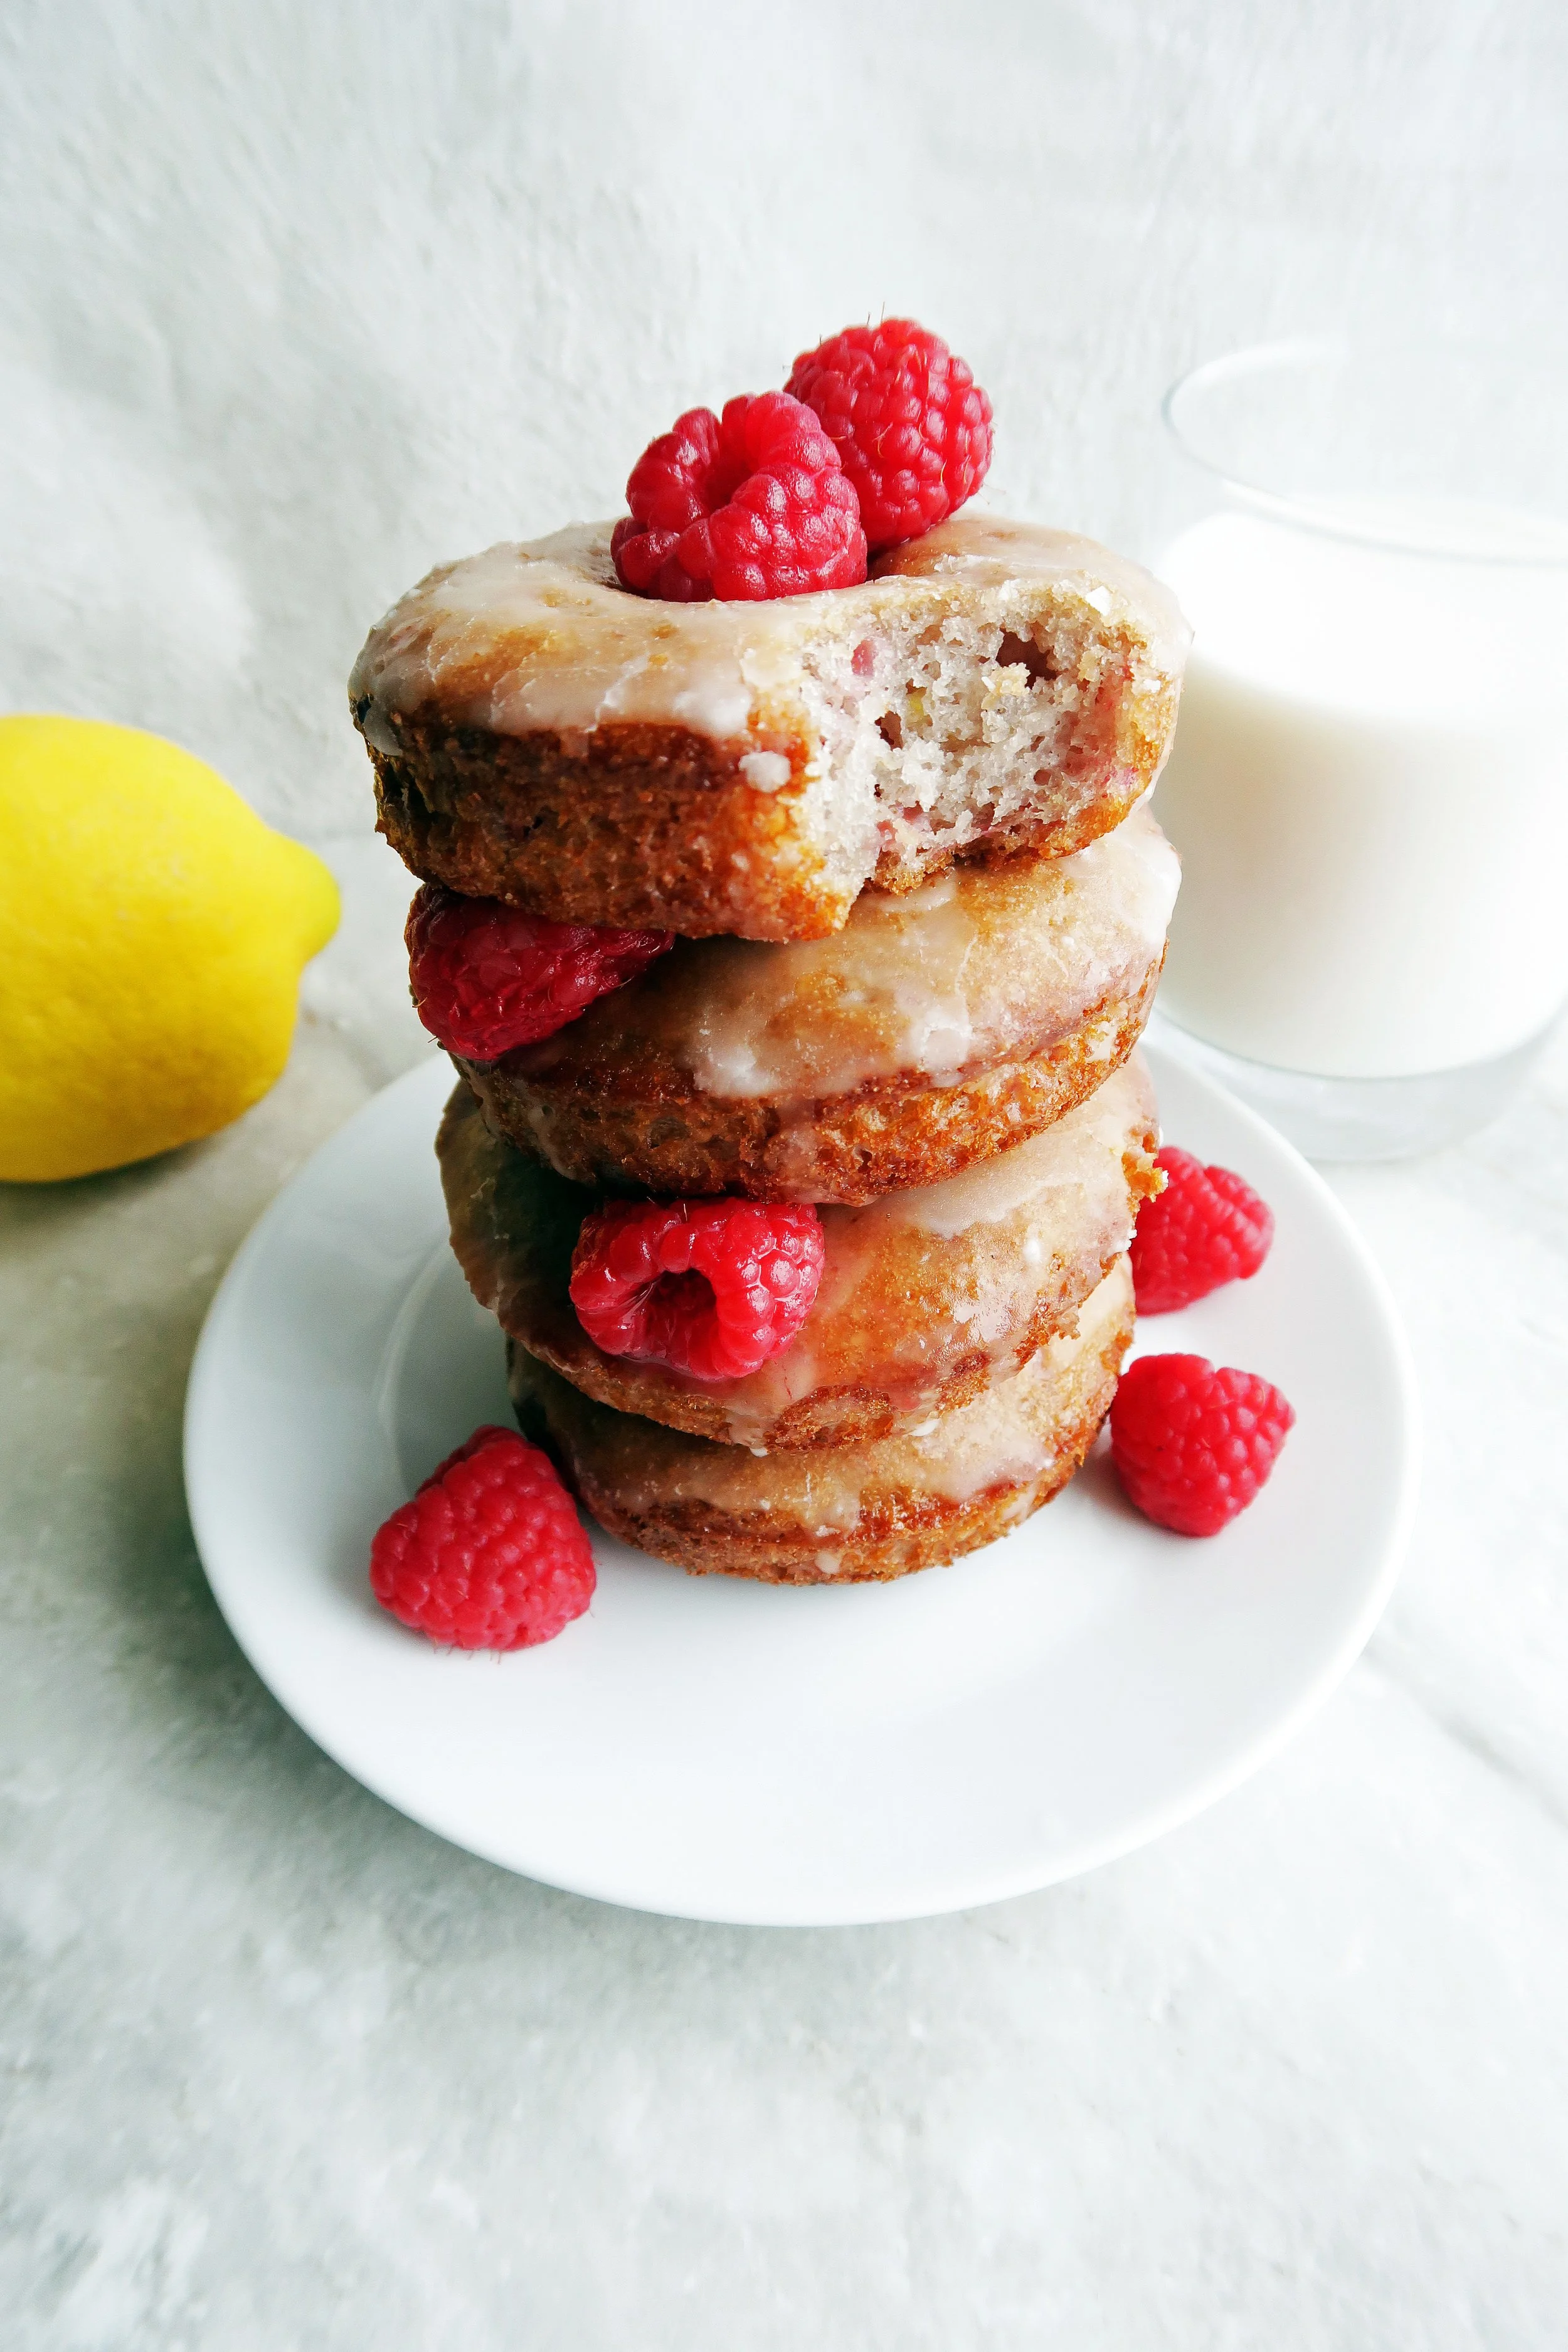 Four Baked Raspberry Lemon Glazed Donuts stacked on a white plate with raspberries around it, a lemon, and glass of milk in the background.